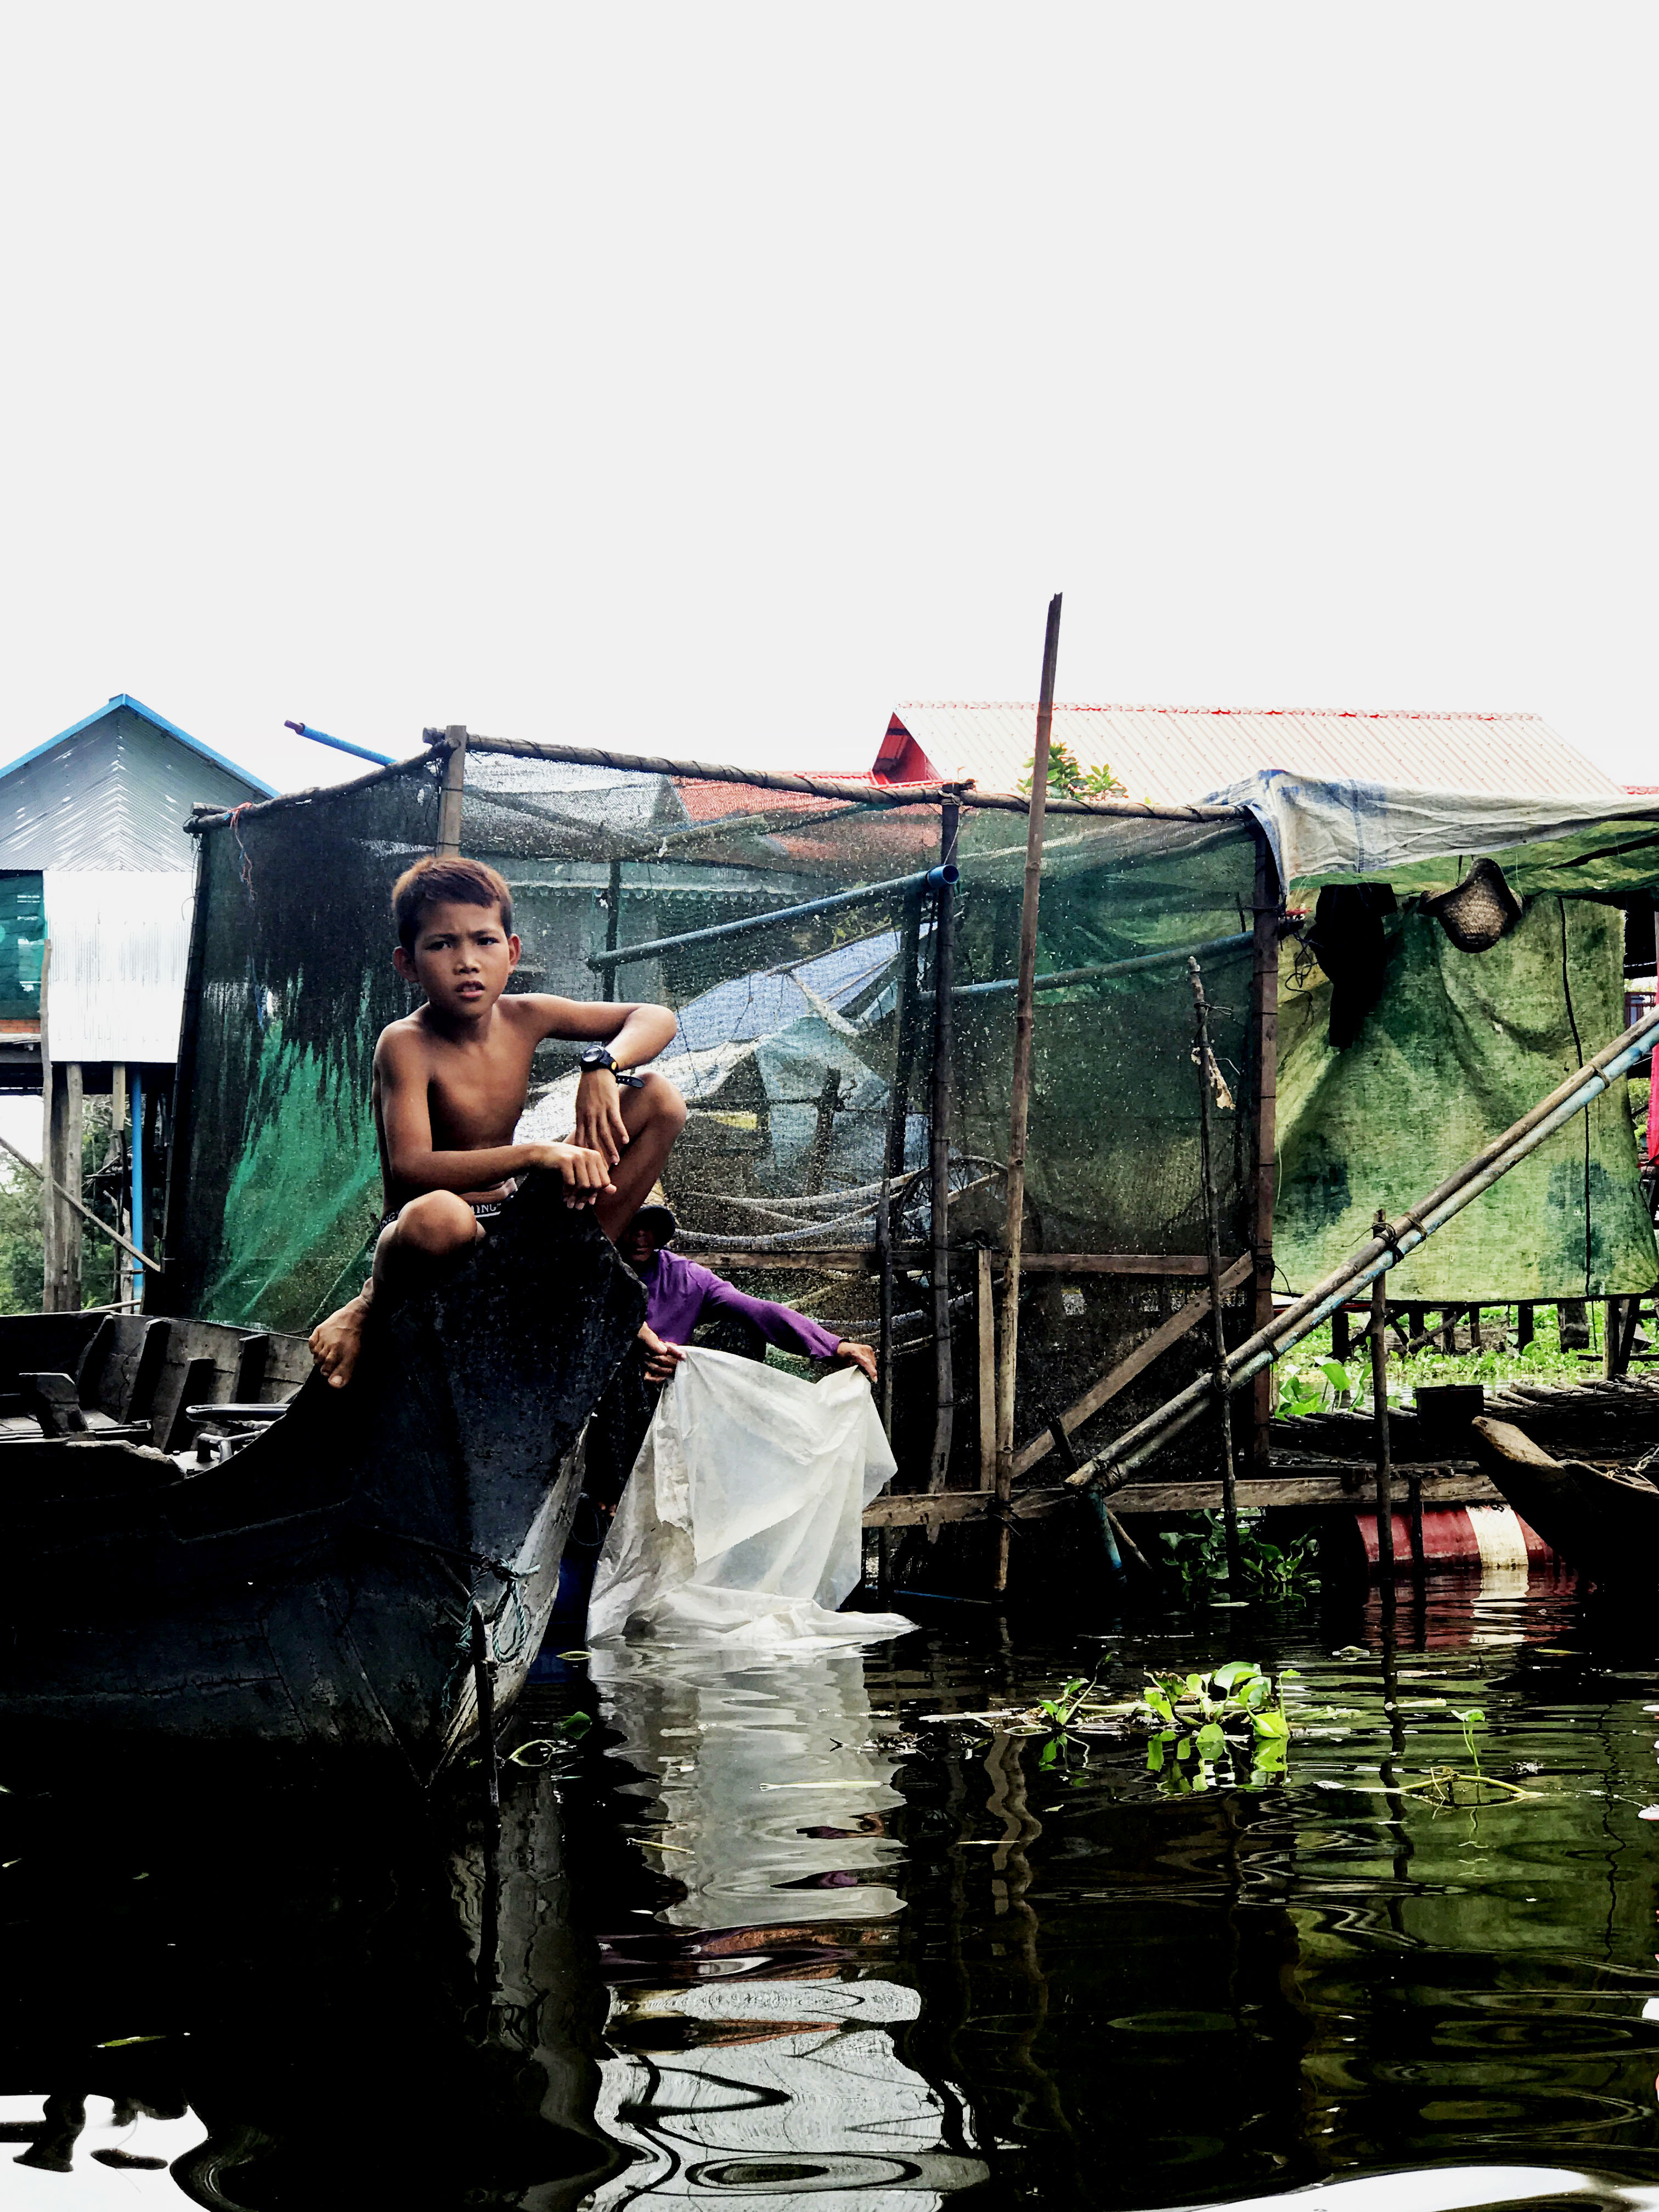 It laps against the fishing boats and the stilted houses, nestled among the flooded forest on the fringes of the seasonally inundated lake. Time is spent repairing fishing nets and sorting the catch. People live in harmony with the ecosystem. It is integral to all life here.  Water.